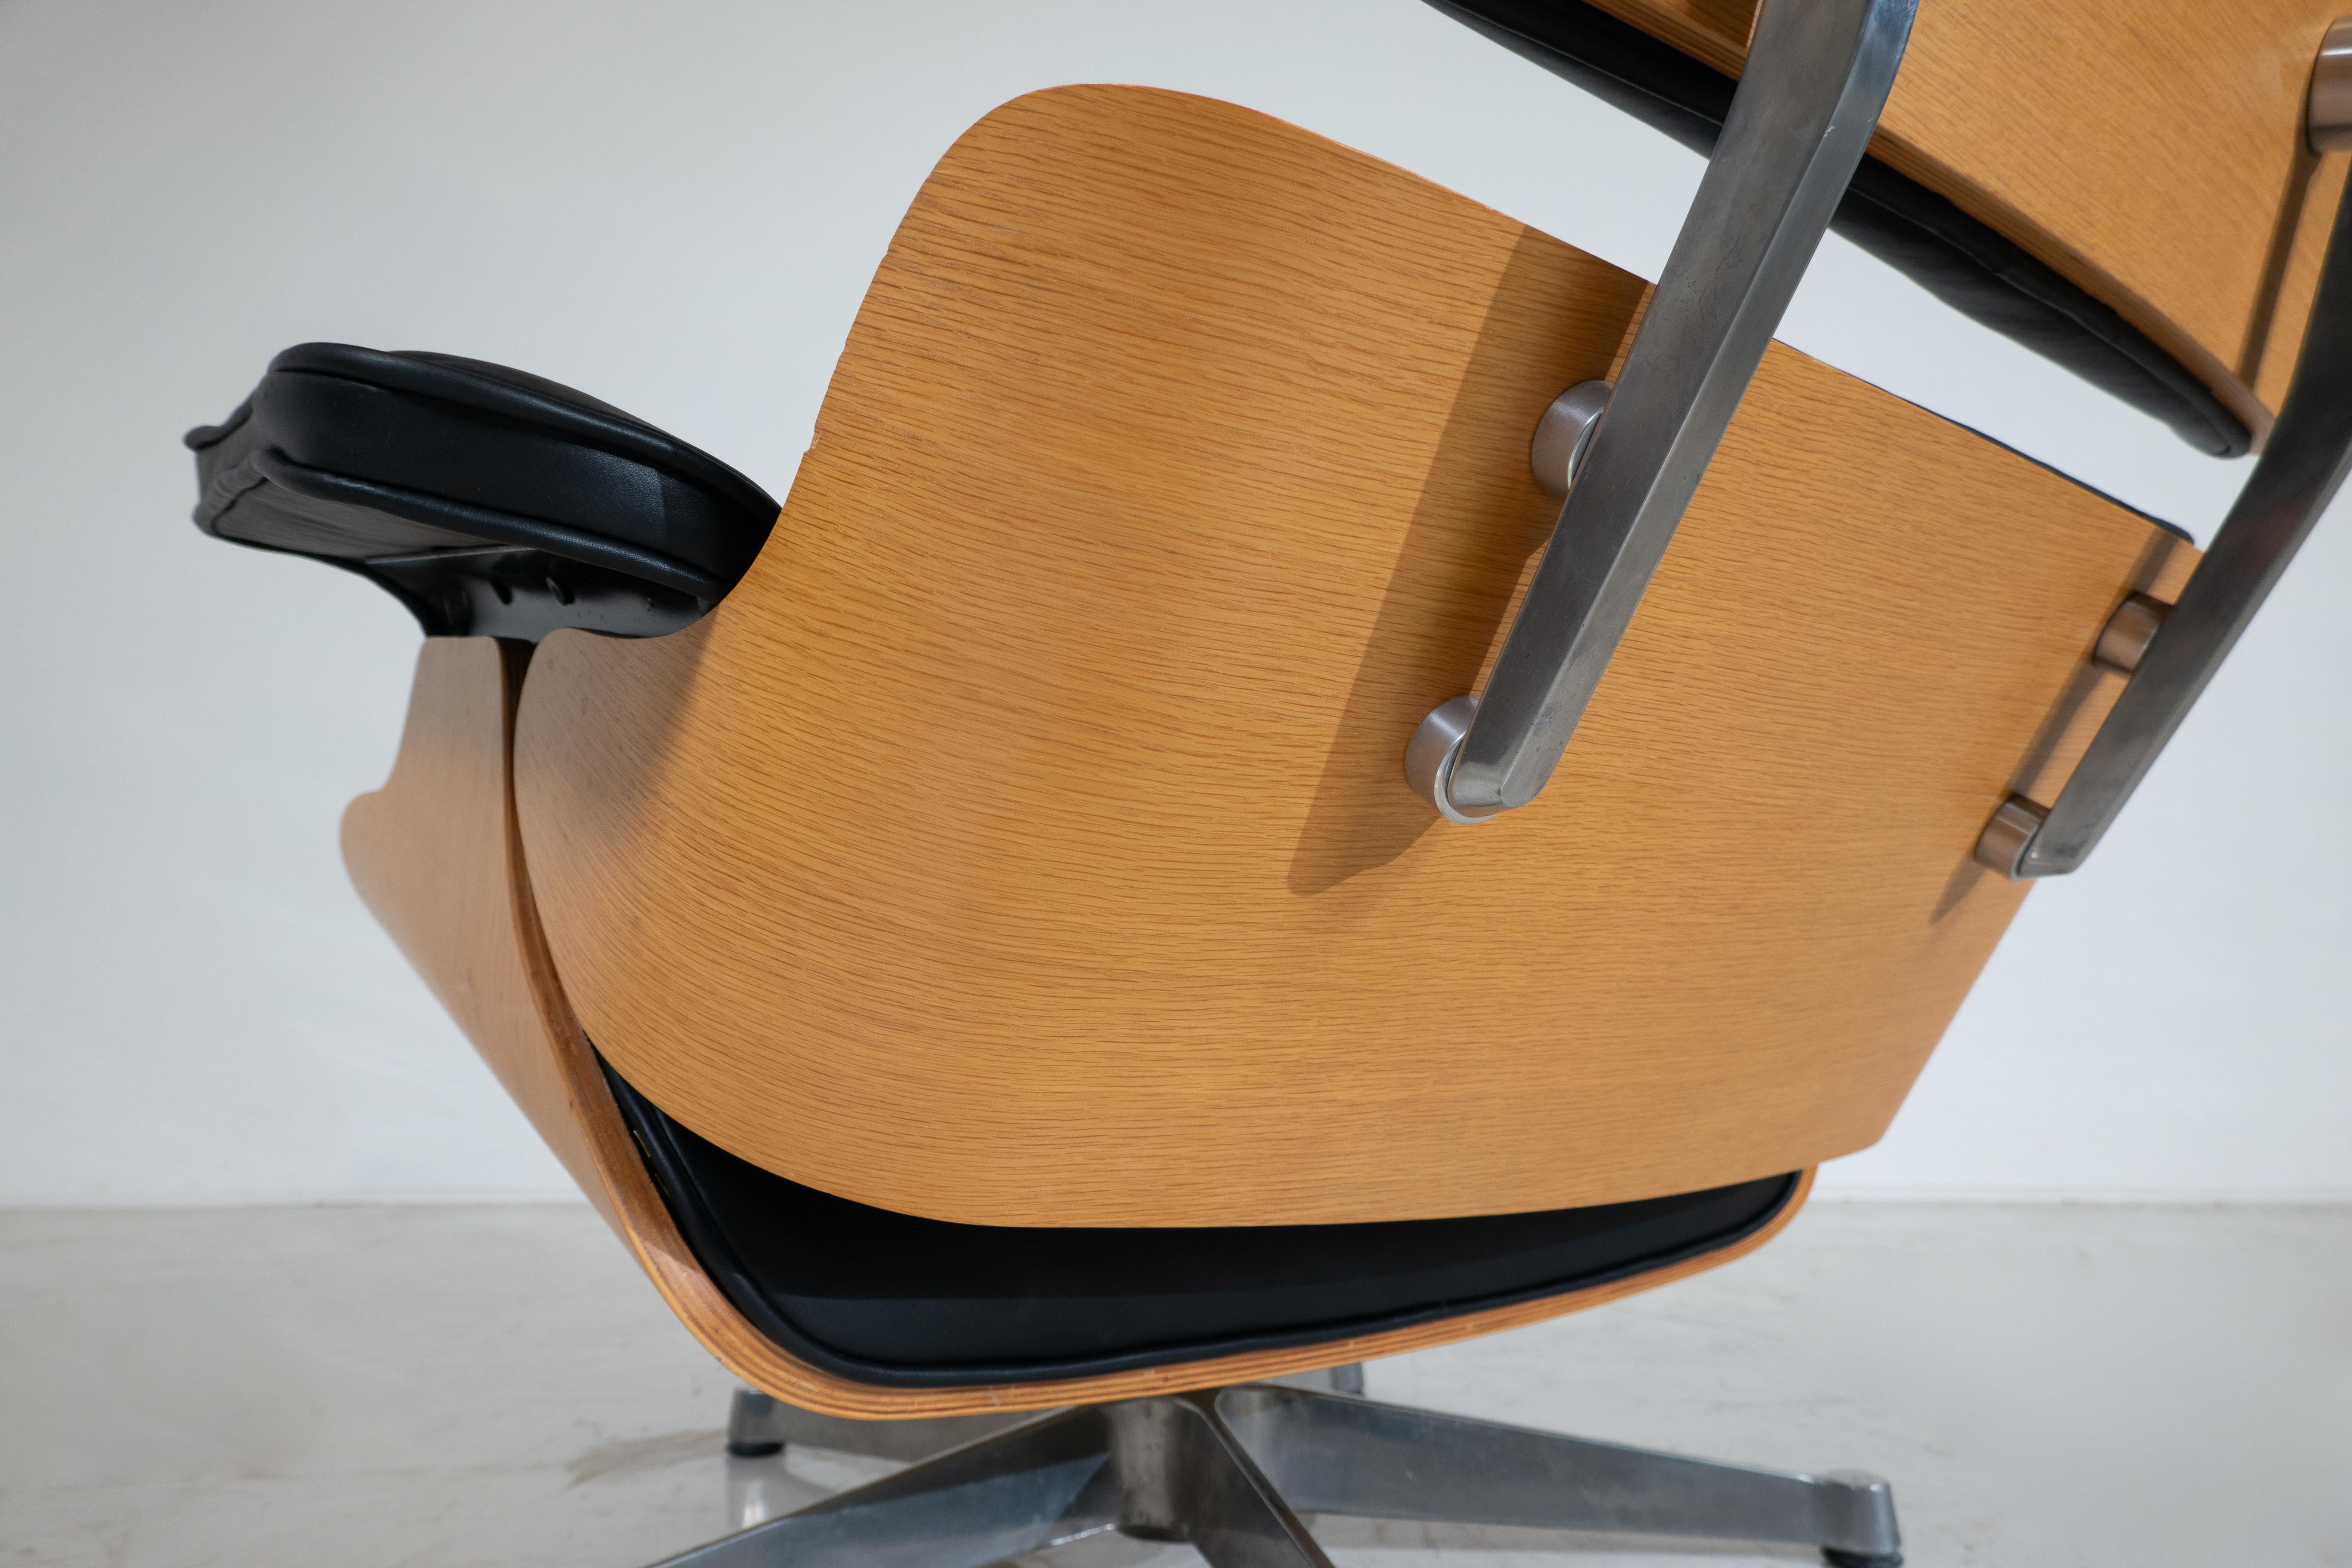 Late 20th Century Mid-Century Lounge Chair and Ottoman by Charles & Ray Eames for Herman Miller For Sale